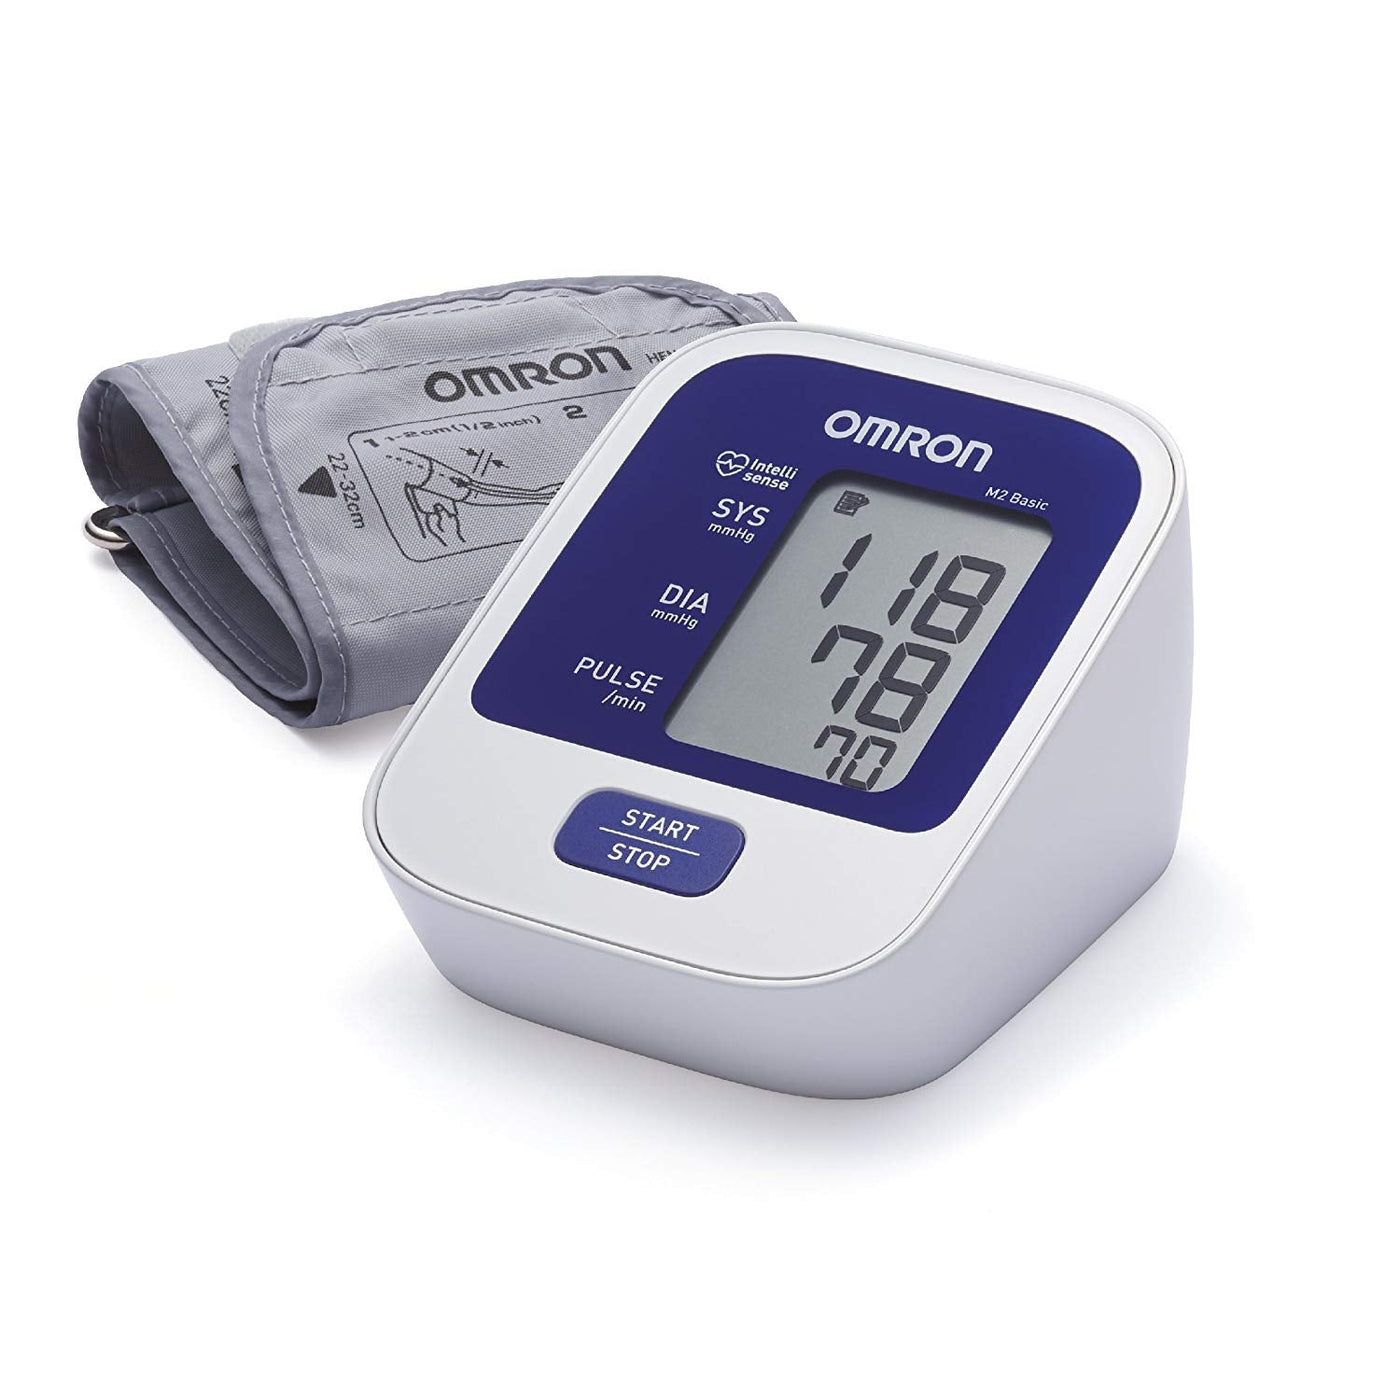 Home blood pressure monitor - The Weightloss Doctor